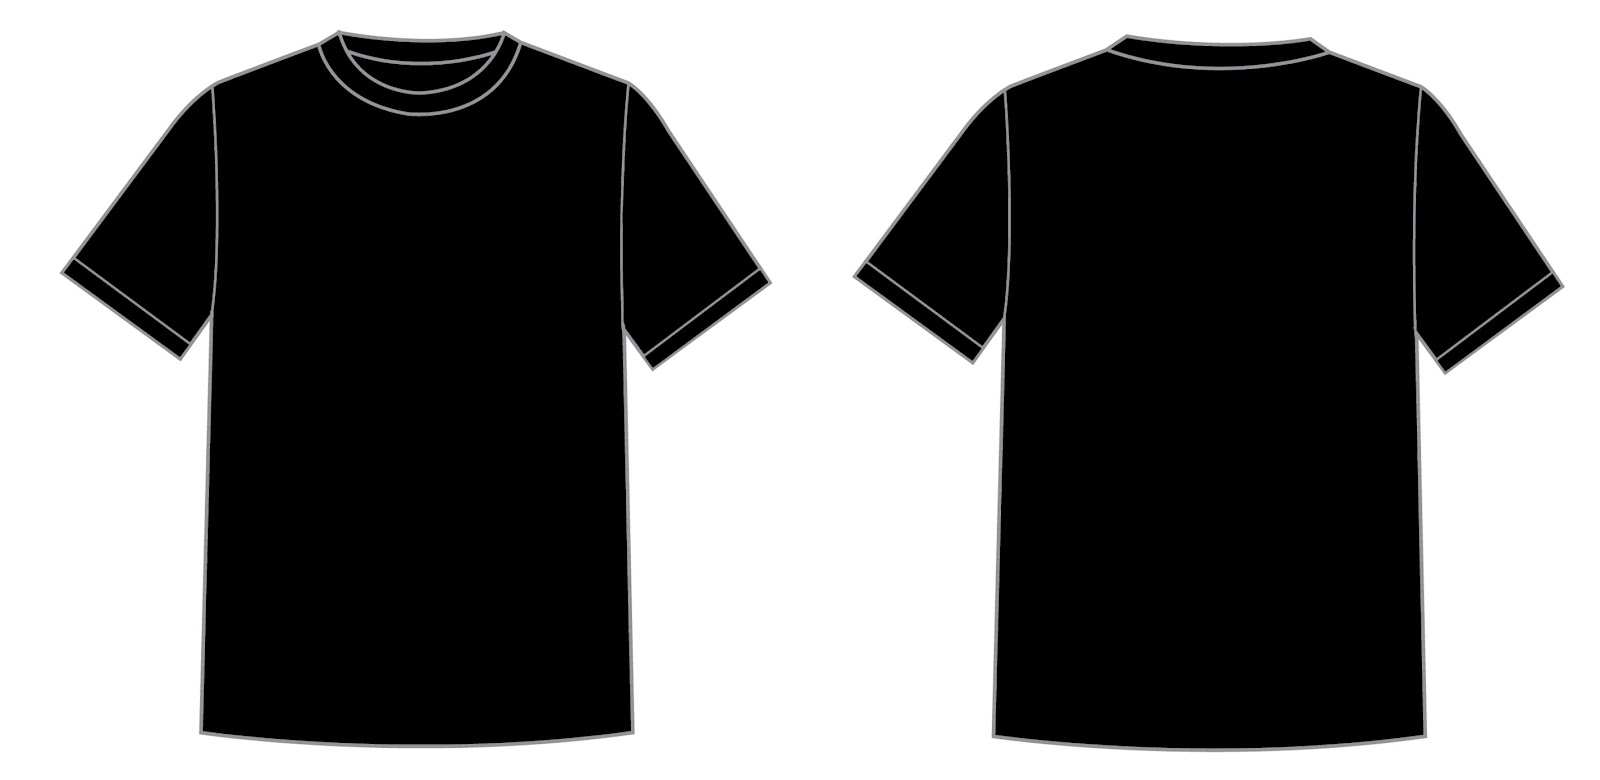 free-6221-realistic-black-t-shirt-template-front-and-back-yellowimages-mockups